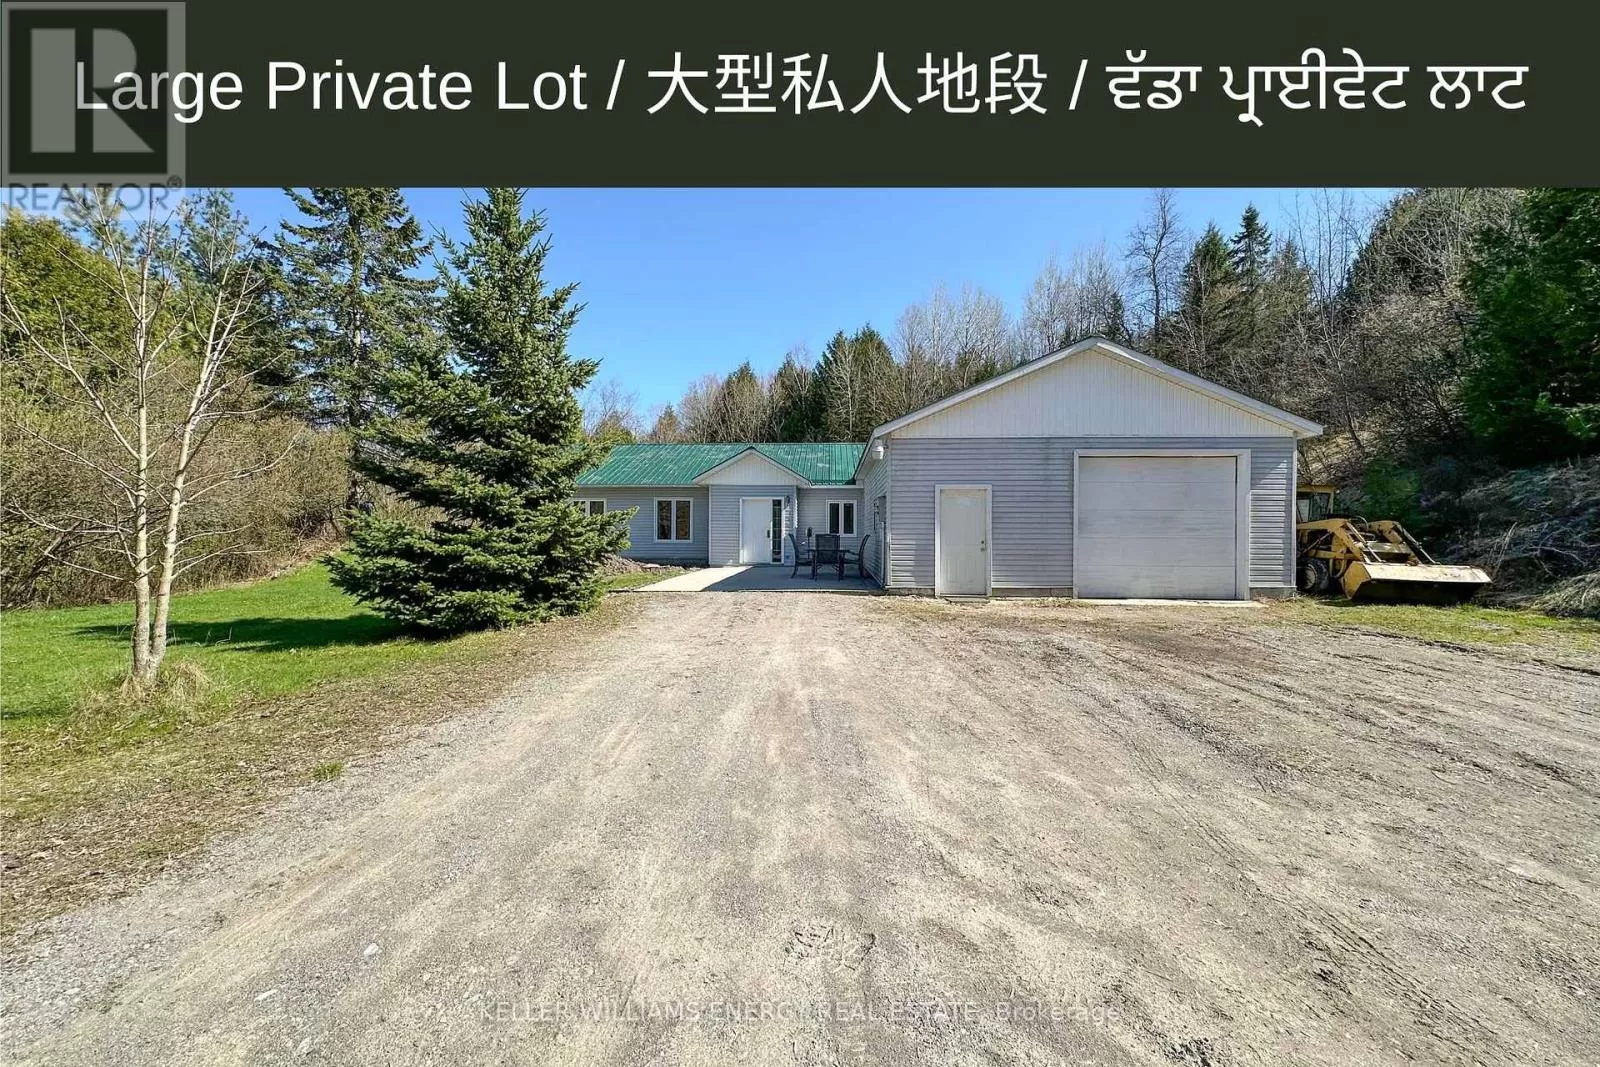 House for rent: 314 County Rd 30, Brighton, Ontario K0K 1H0